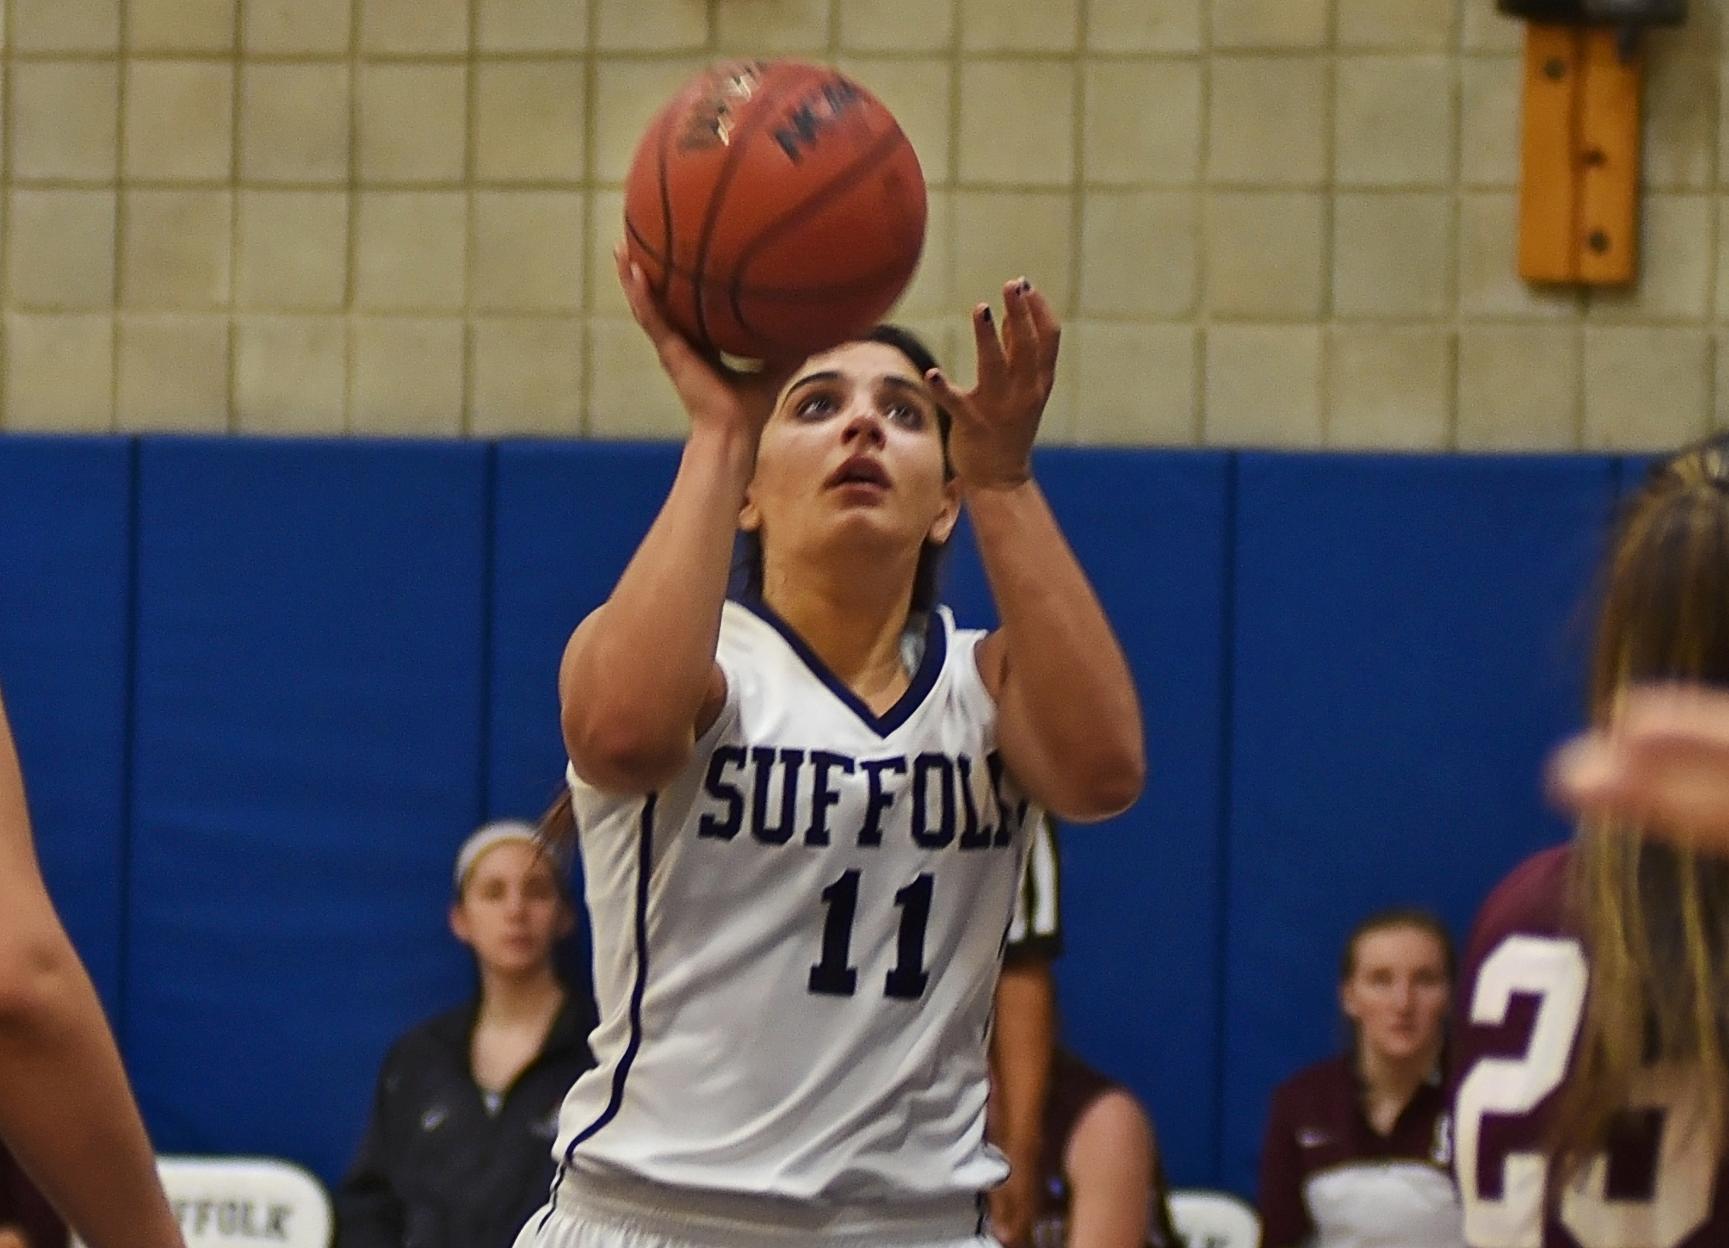 Campellone Sets Game Scoring Record, Women’s Basketball Handles Lasell